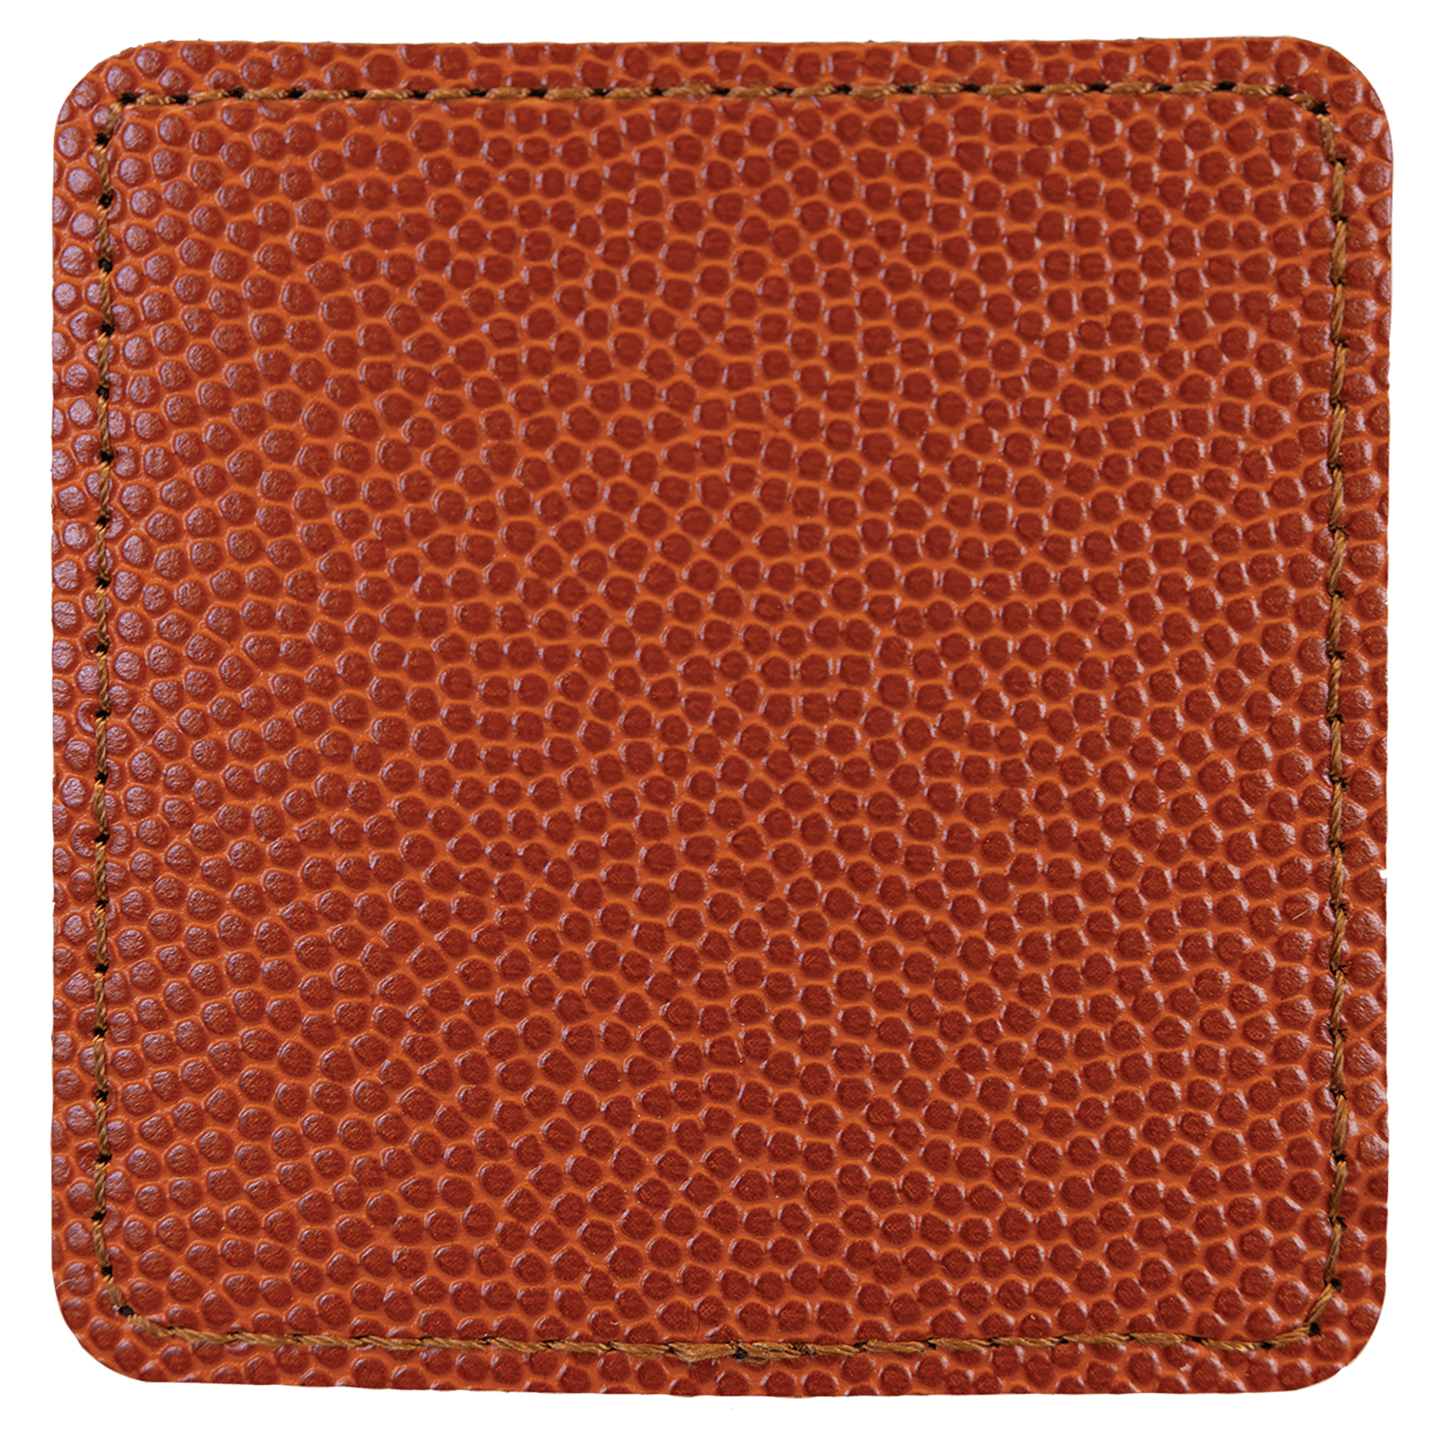 3" x 3" Square Basketball Laserable Leatherette Patch with Adhesive